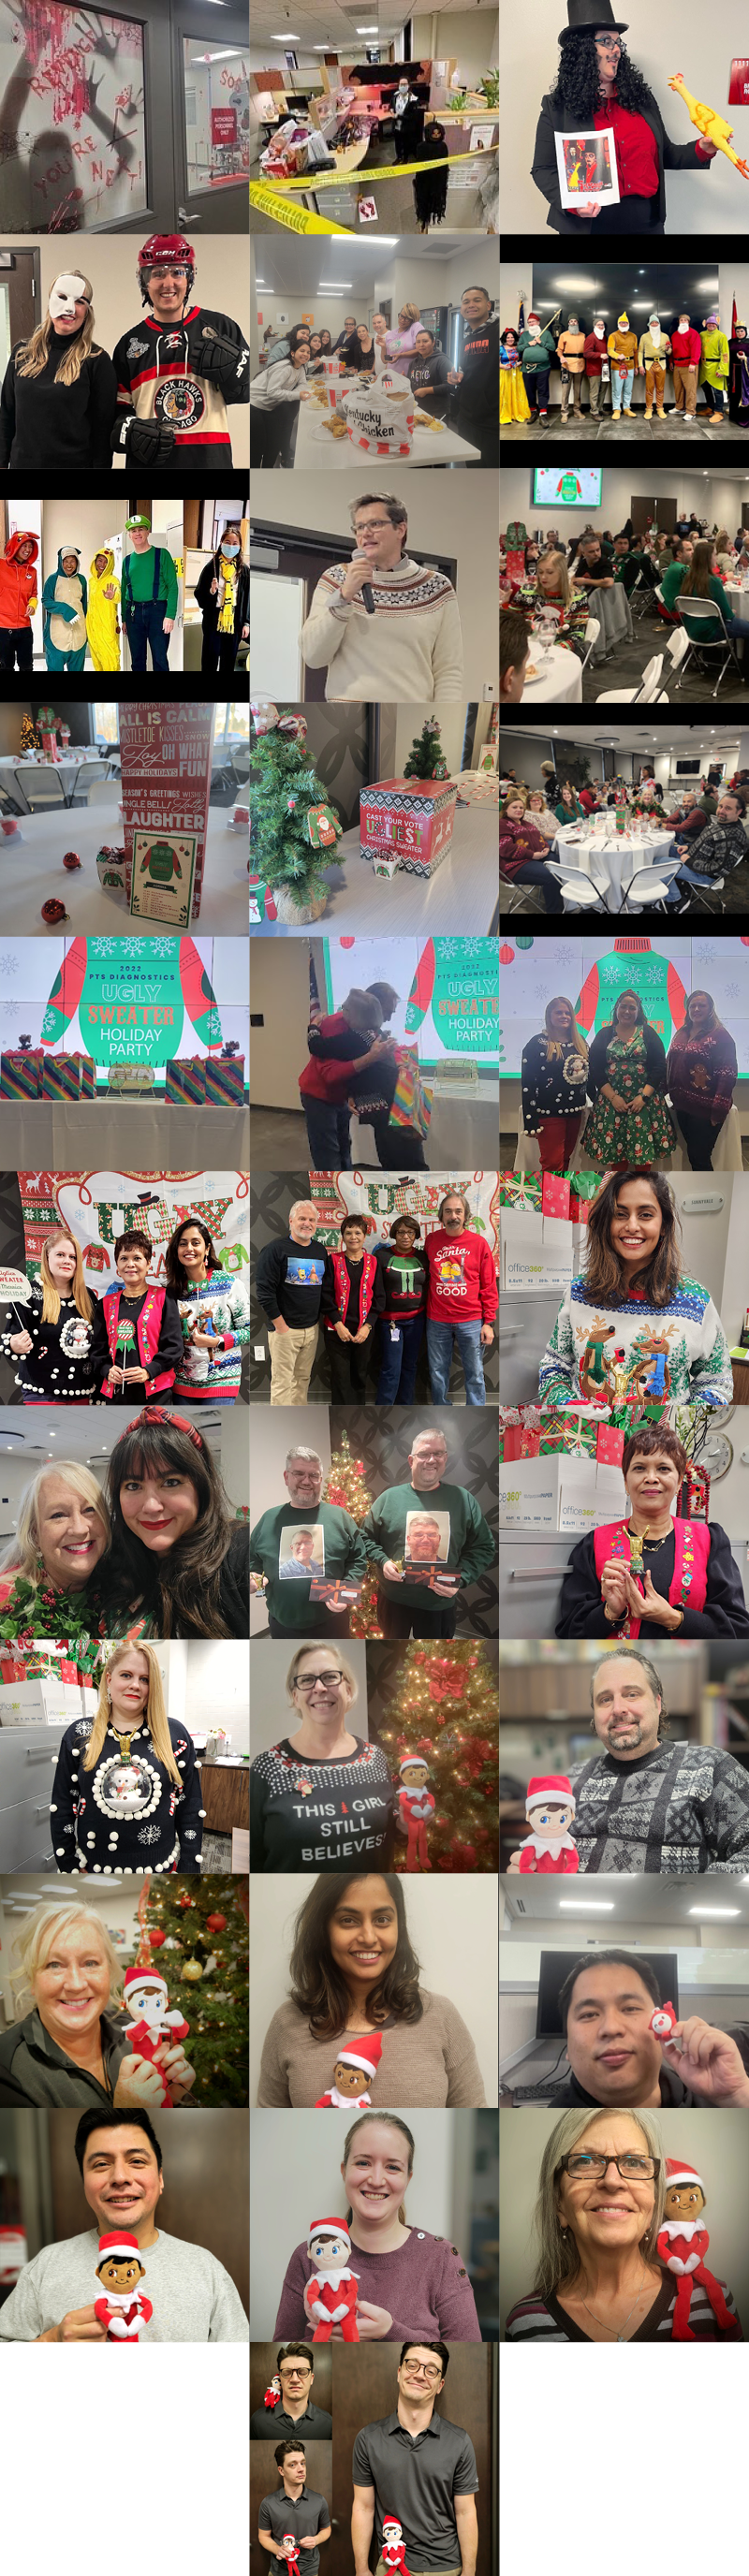 Collage of holiday celebrations